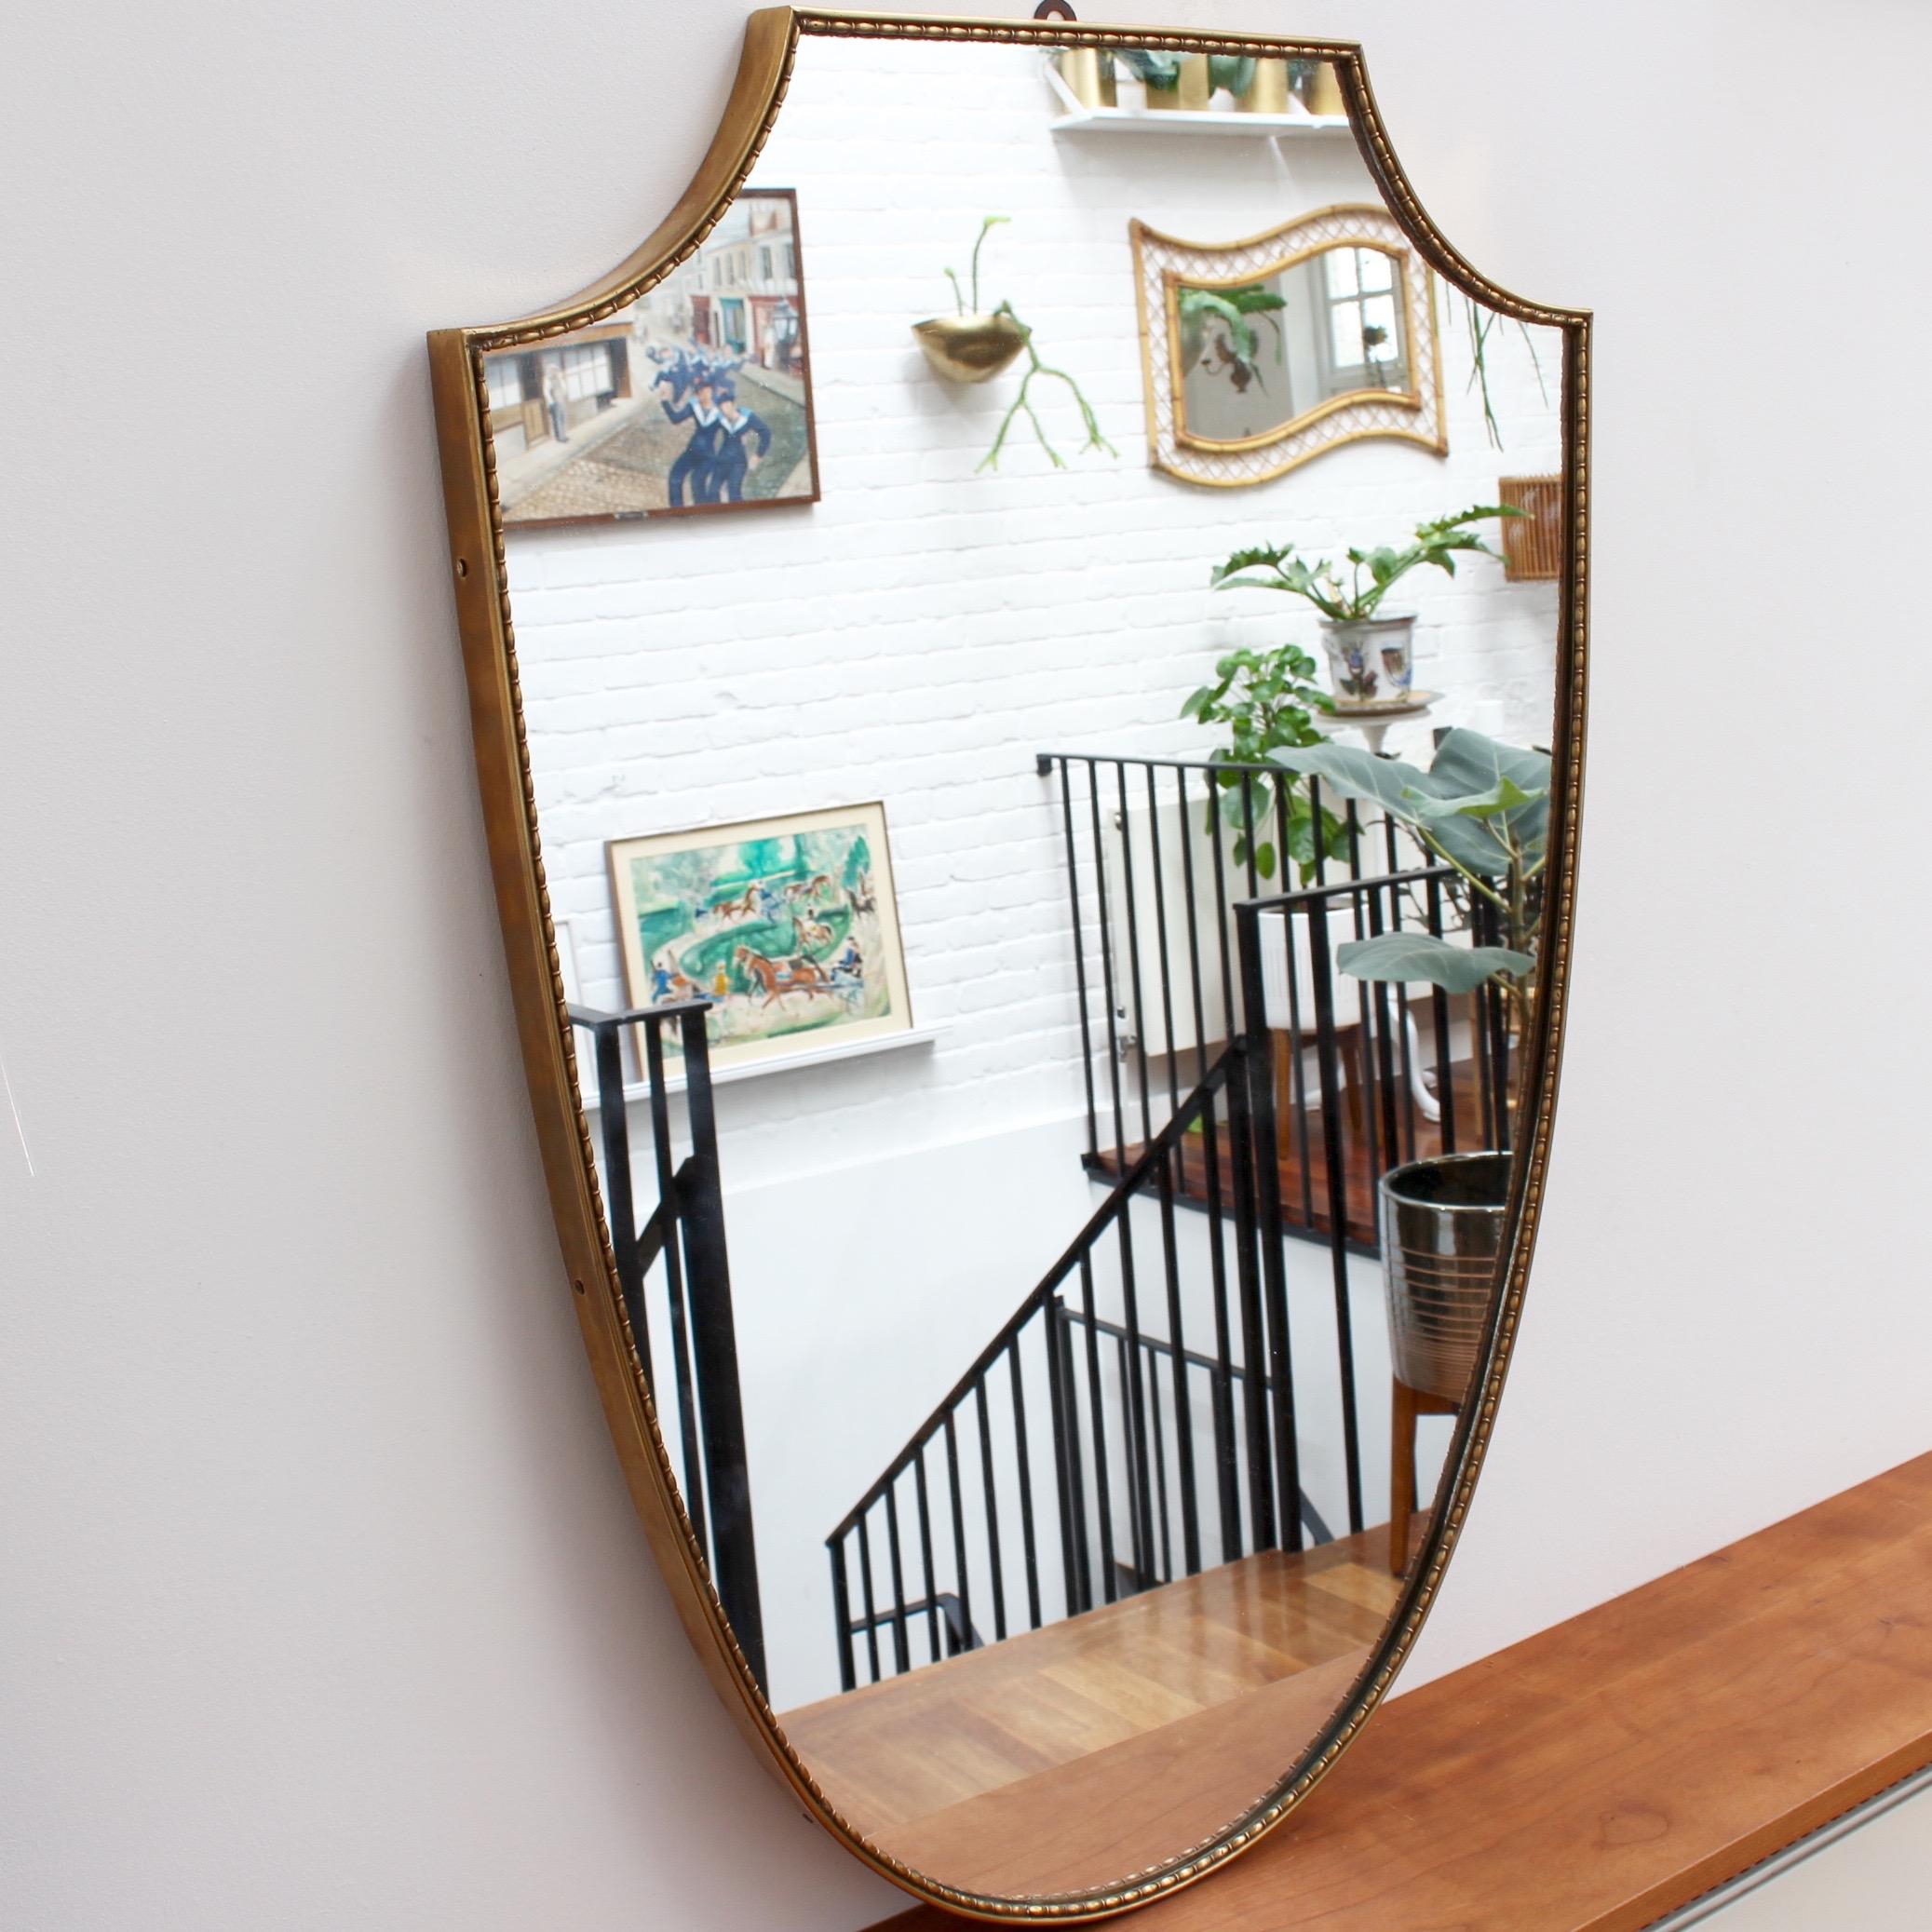 Midcentury Italian wall mirror with brass frame (circa 1950s). The mirror is large, crest-shaped, classically elegant with distinctive beading in a modern Gio Ponti style. This mirror is in good vintage condition. There are some evident but